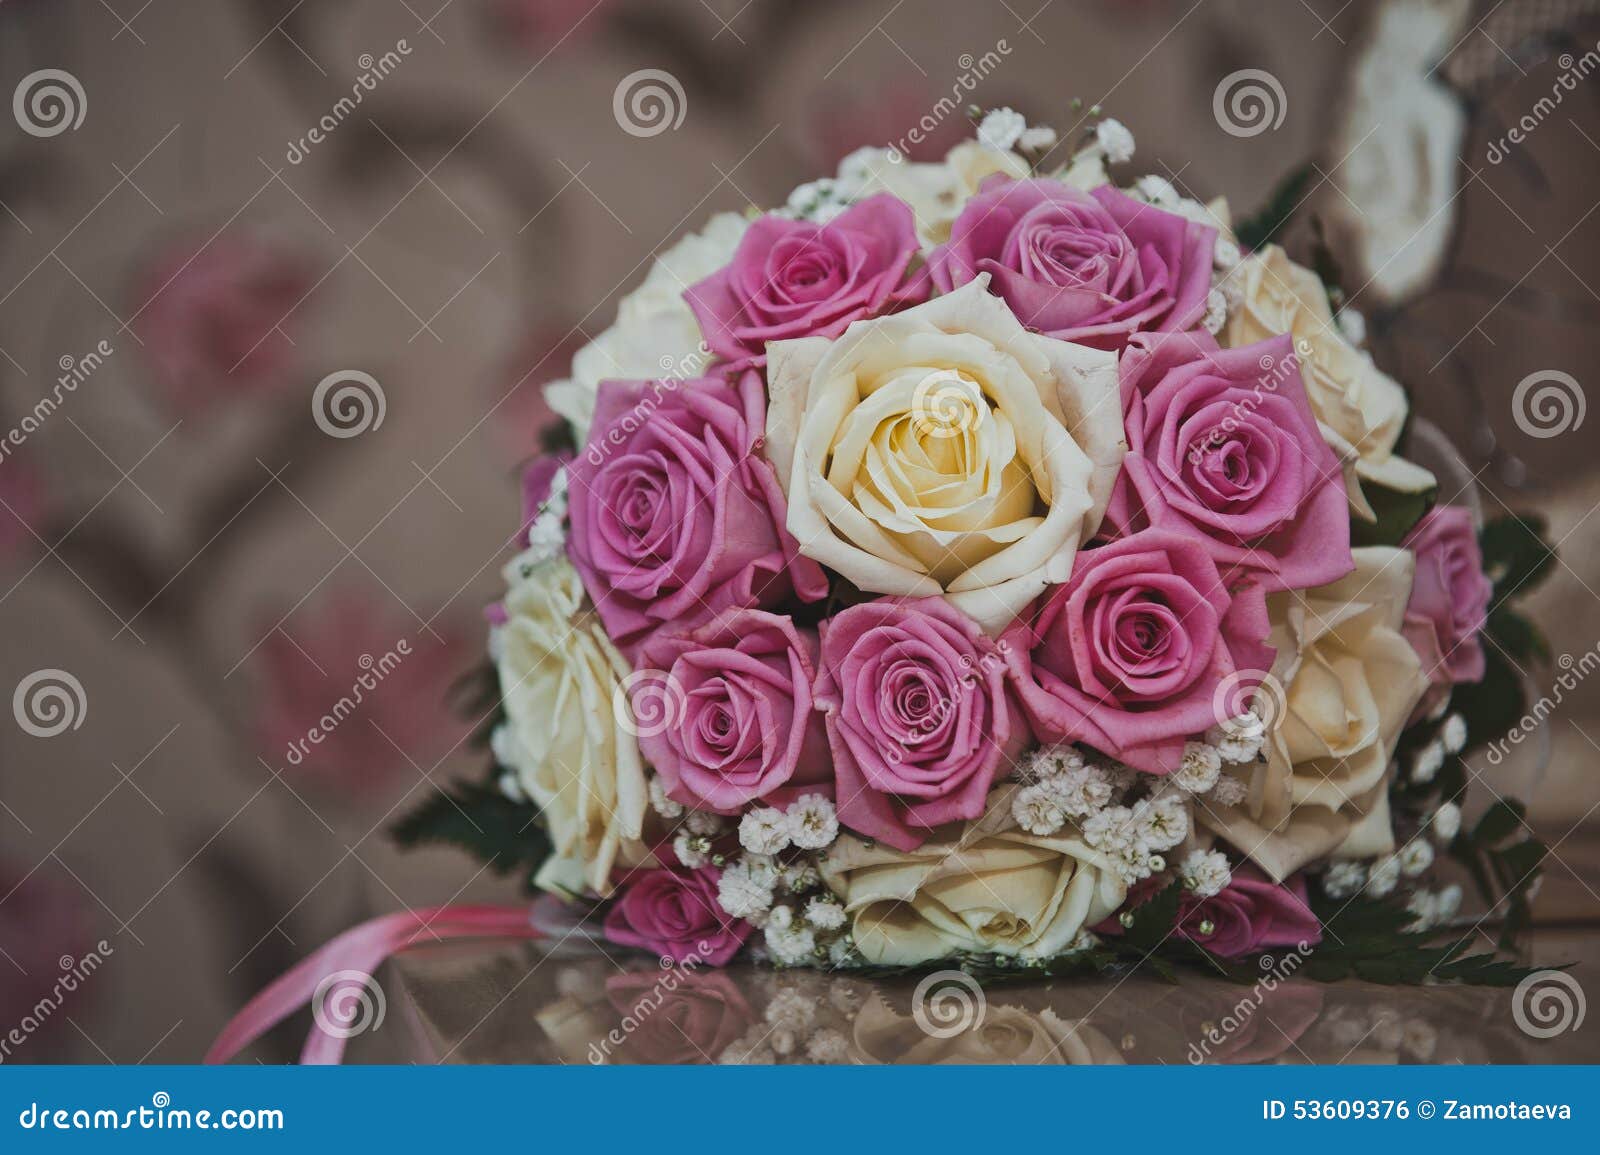 Bunch Of Flowers From Roses On A Table 2379. Stock Photo - Image of ...